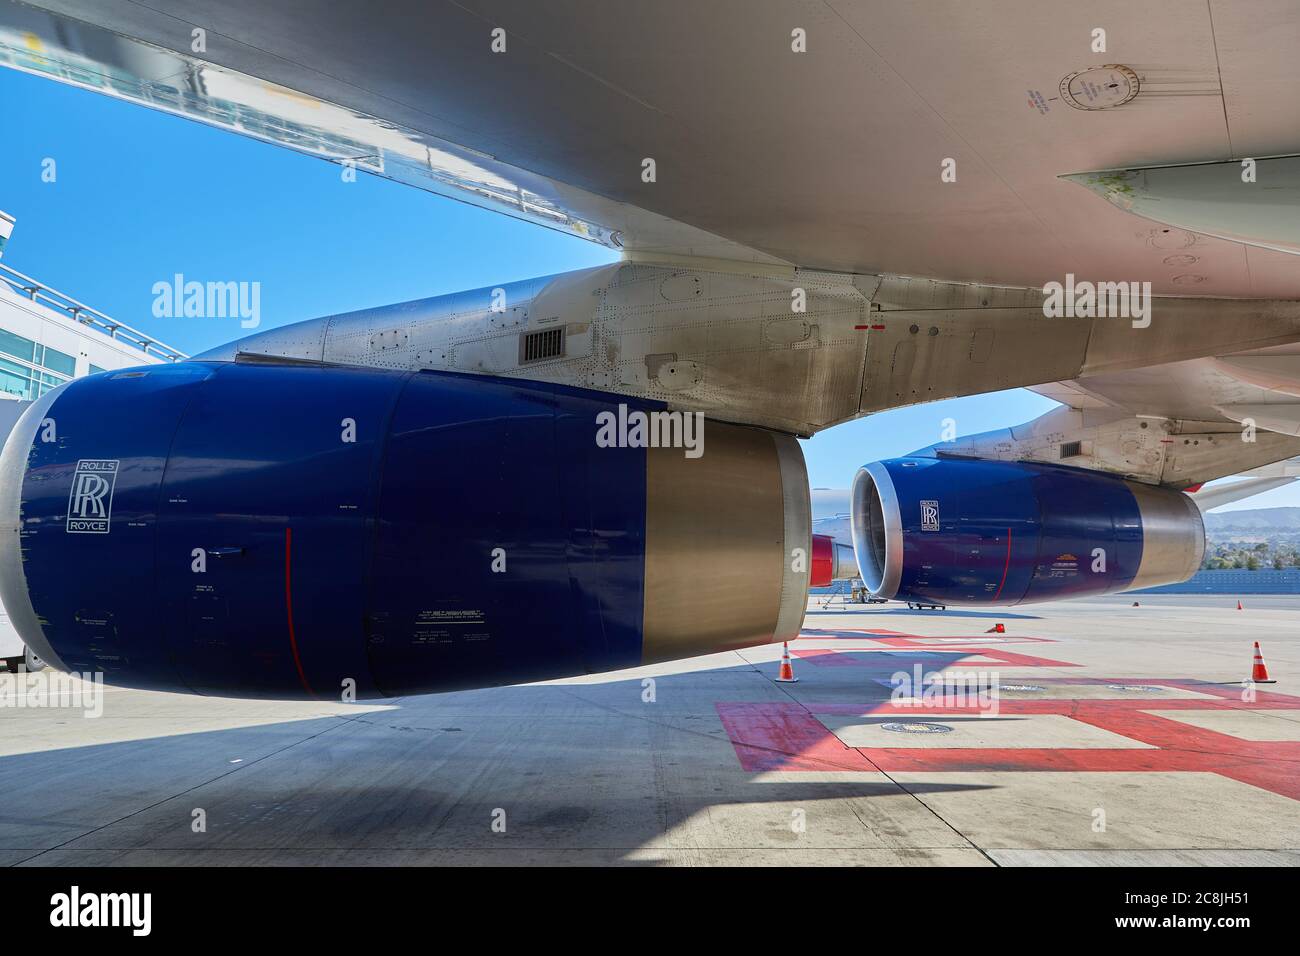 Jet Engines Of A British Airways Boeing 747-400 Parked At San Francisco International Airport, California, USA. Stock Photo